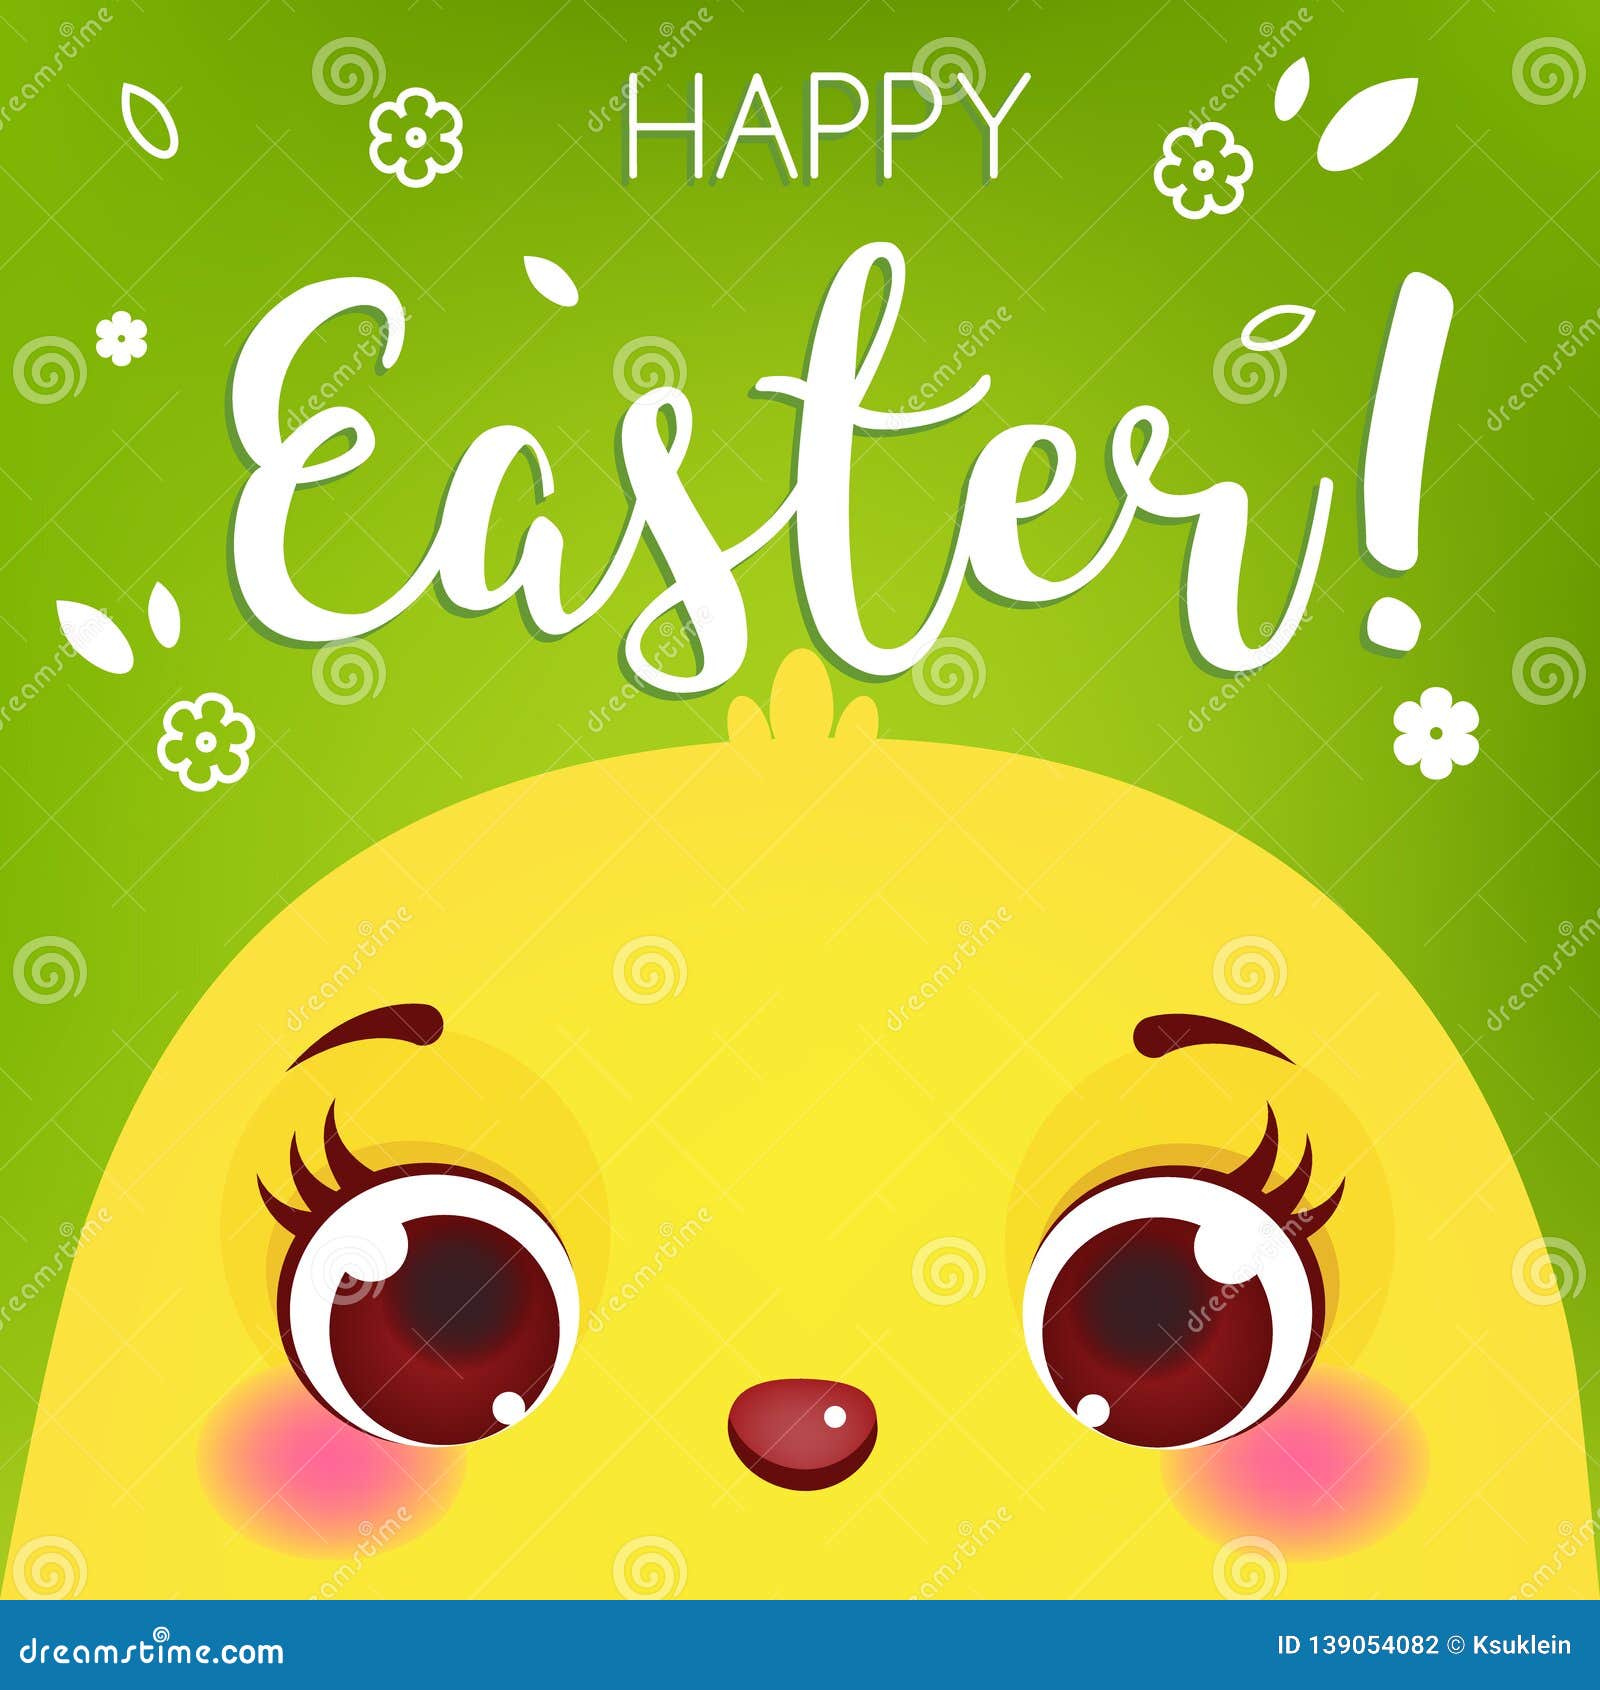 Happy Easter Card Template. Cute Chicken Face. Cartoon Chick Intended For Easter Chick Card Template